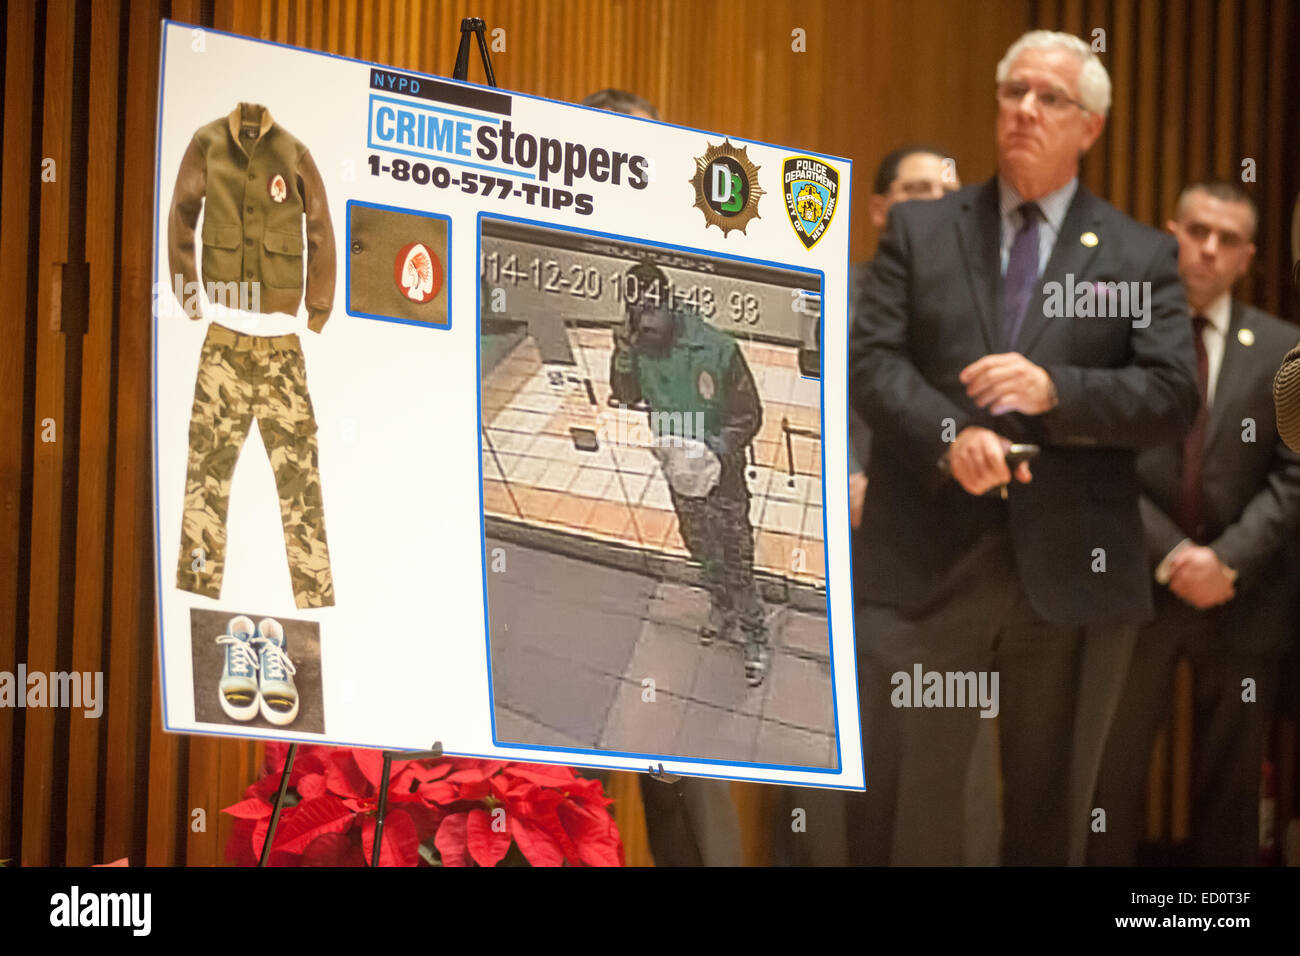 Crimestoppers poster at a media briefing in One Police Plaza the assassination of two NYPD officers, Wenjian Liu and Rafael Ramos by Ismaaiyl Brinsley.  The officers were murdered in Brooklyn in their squad car by Brinsley allegedly in retaliation for the Eric Garner death. Brinsley killed himself in the subway during his attempted escape. (© Richard B. Levine) Stock Photo